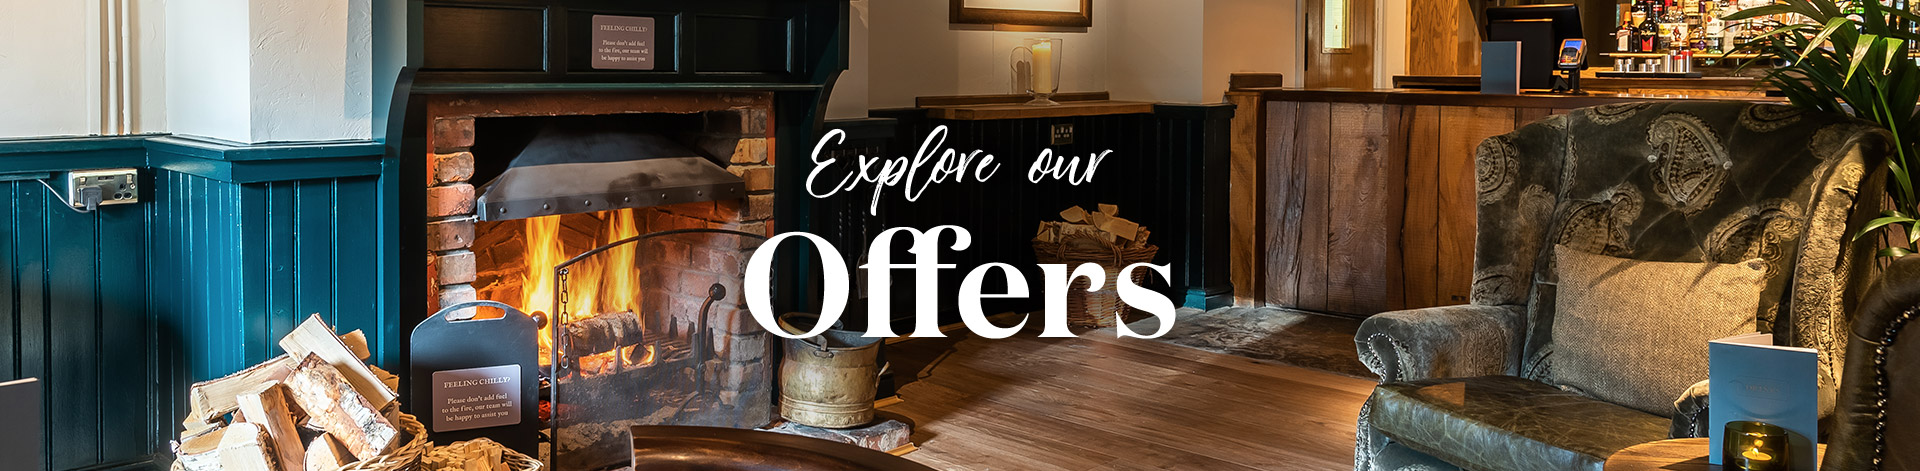 Our latest offers at Inn at Scarcroft